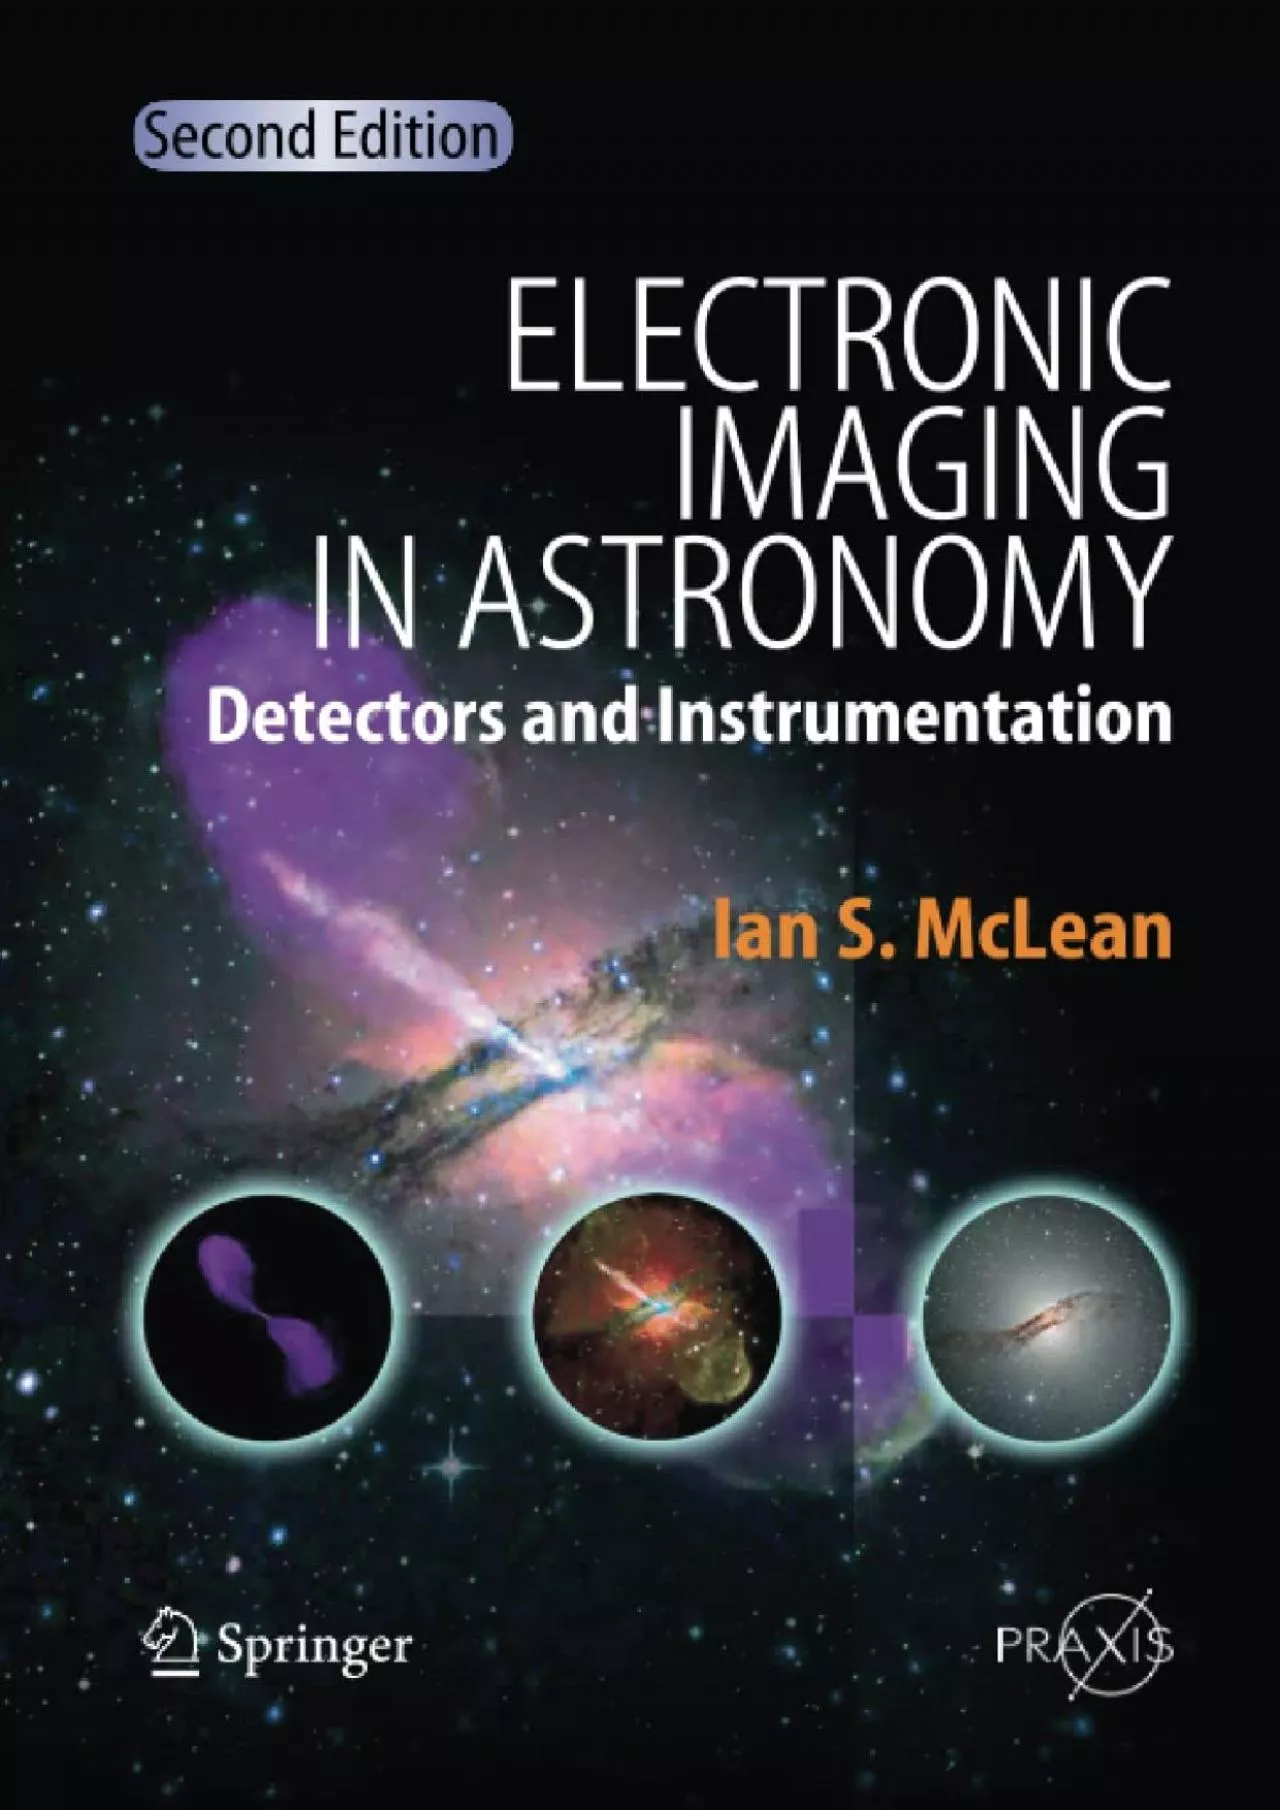 (DOWNLOAD)-Electronic Imaging in Astronomy: Detectors and Instrumentation (Springer Praxis